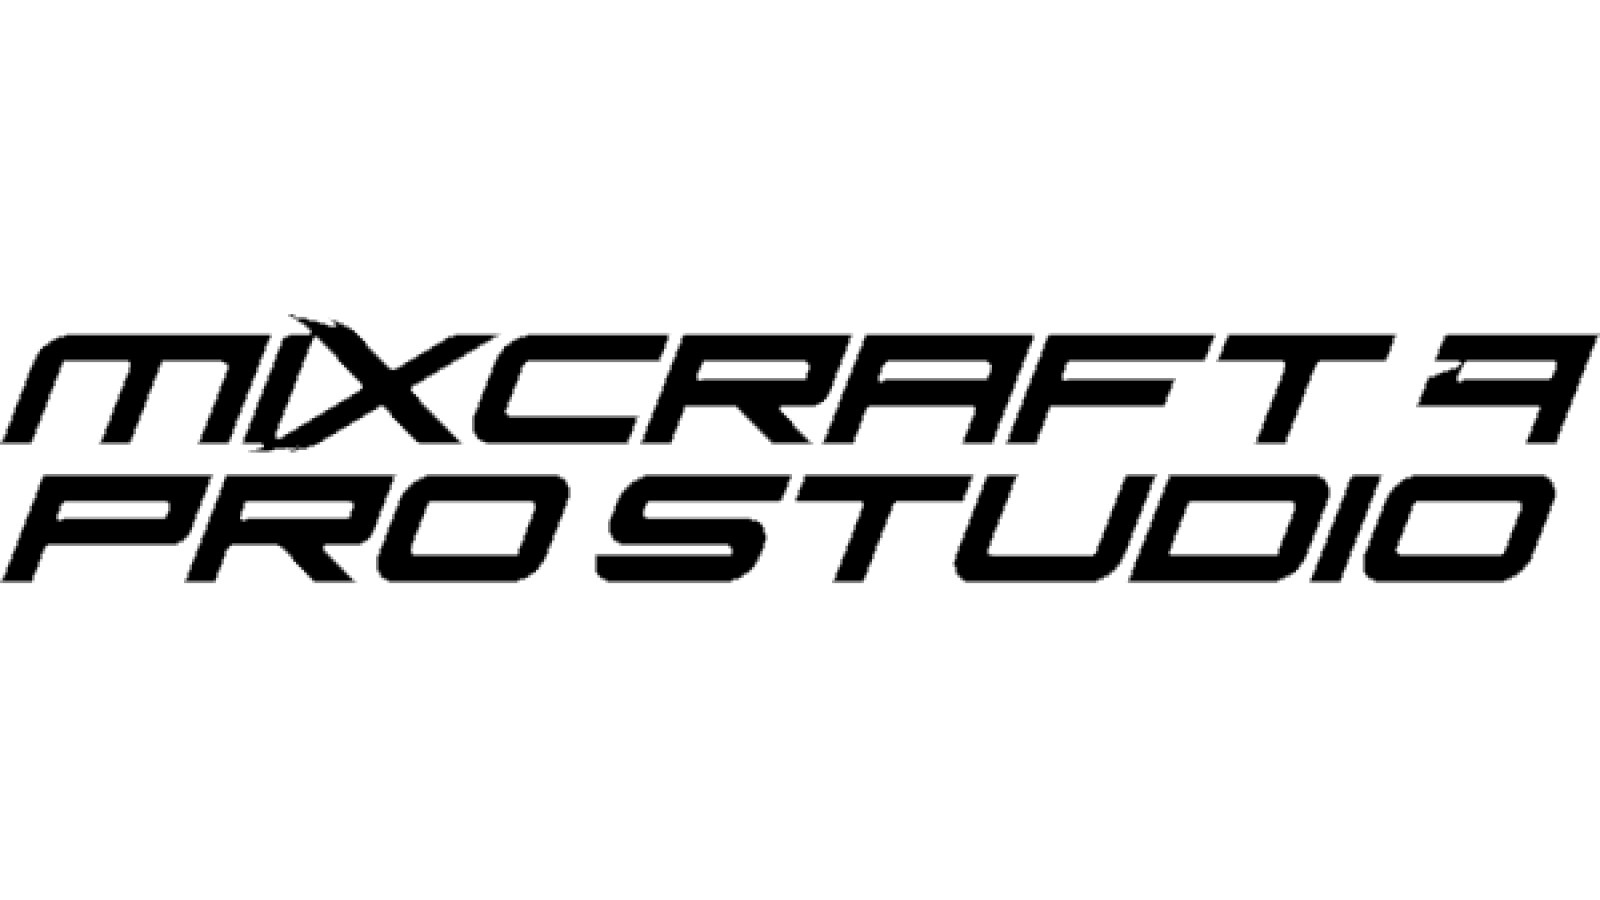 Acoustica mixcraft 3 free download